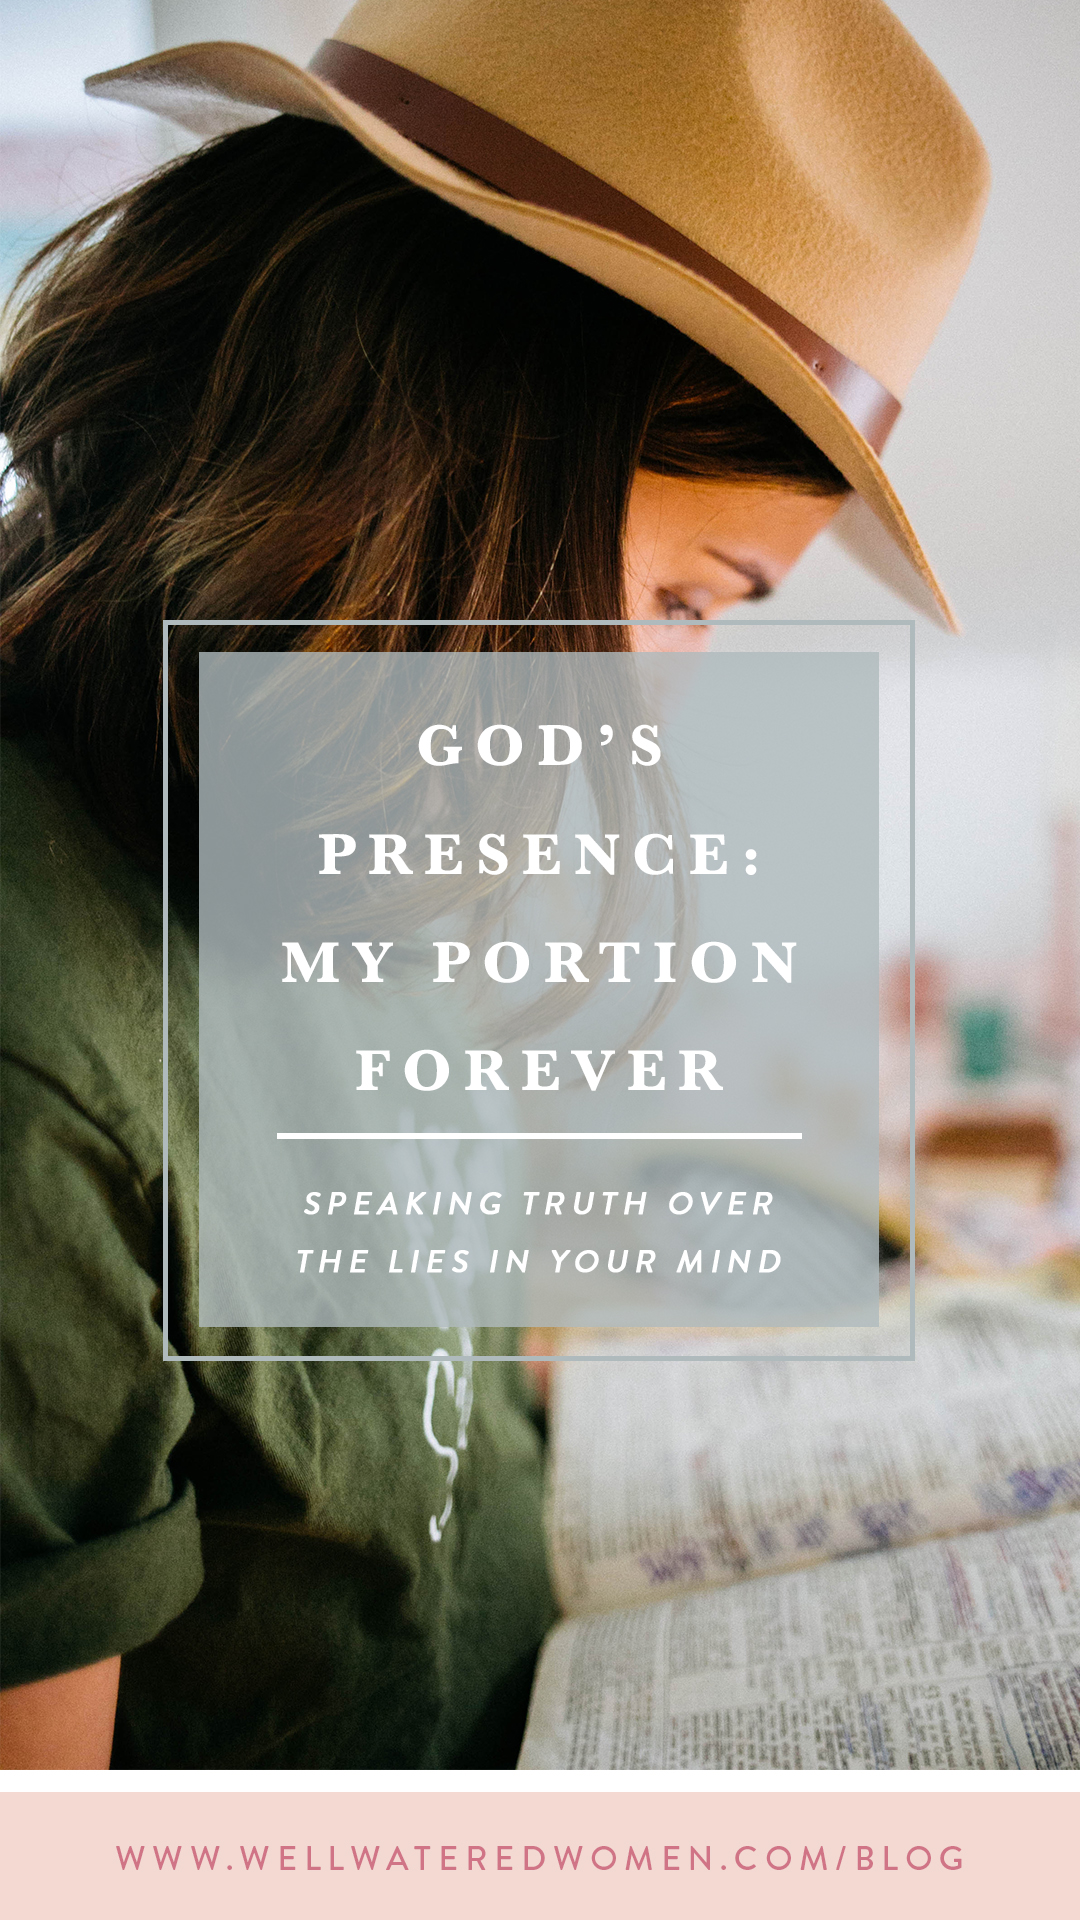 God's presence: my portion forever - Speaking truth over the lies in your mind